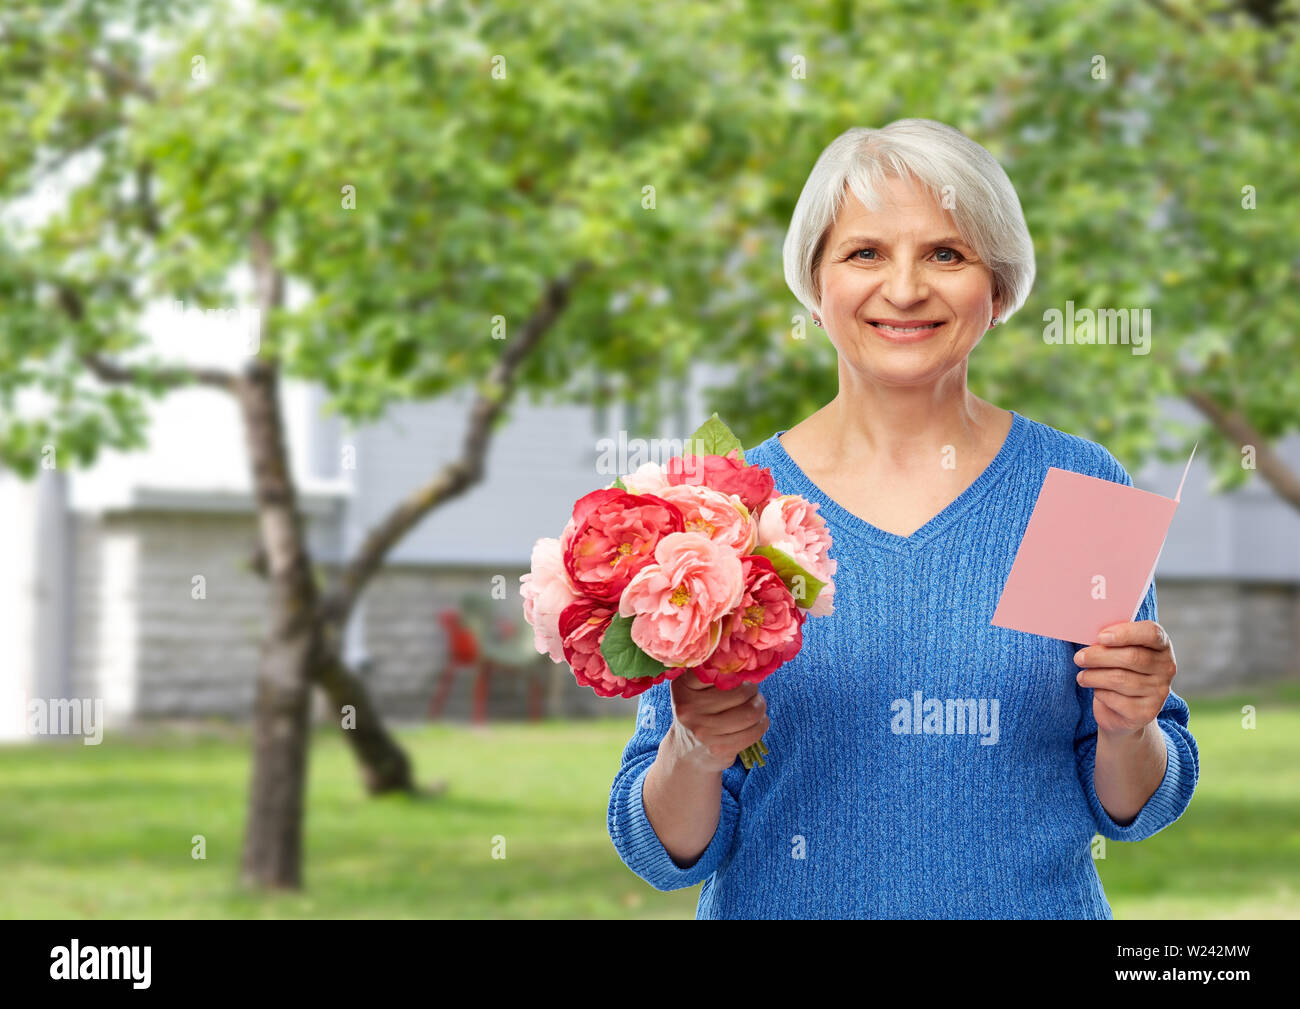 happy senior woman with flowers and greeting card Stock Photo